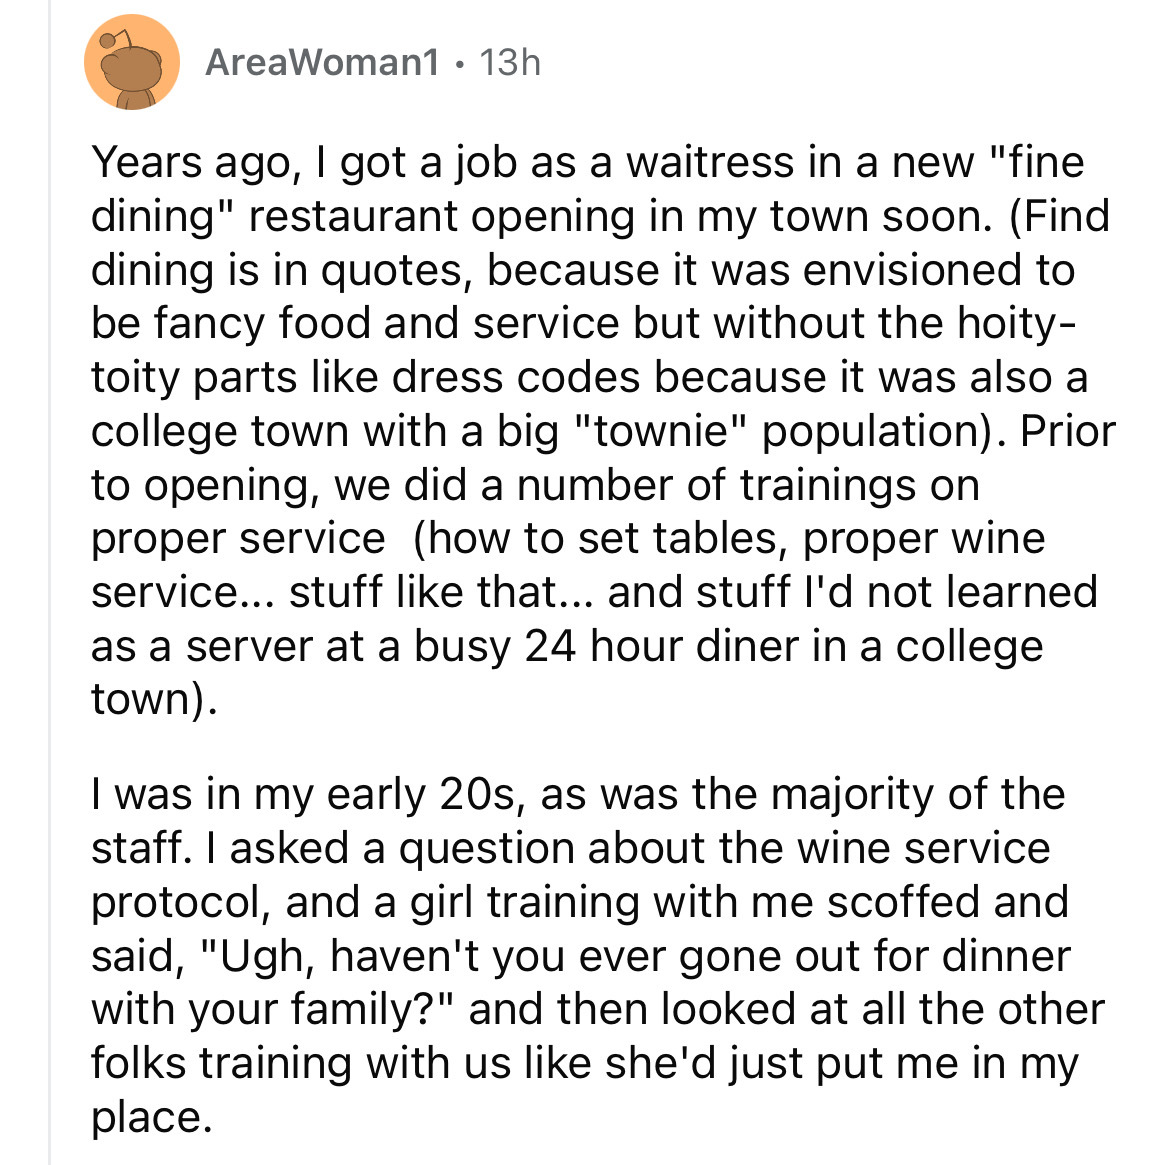 angle - AreaWoman1 13h Years ago, I got a job as a waitress in a new "fine dining" restaurant opening in my town soon. Find dining is in quotes, because it was envisioned to be fancy food and service but without the hoity toity parts dress codes because i